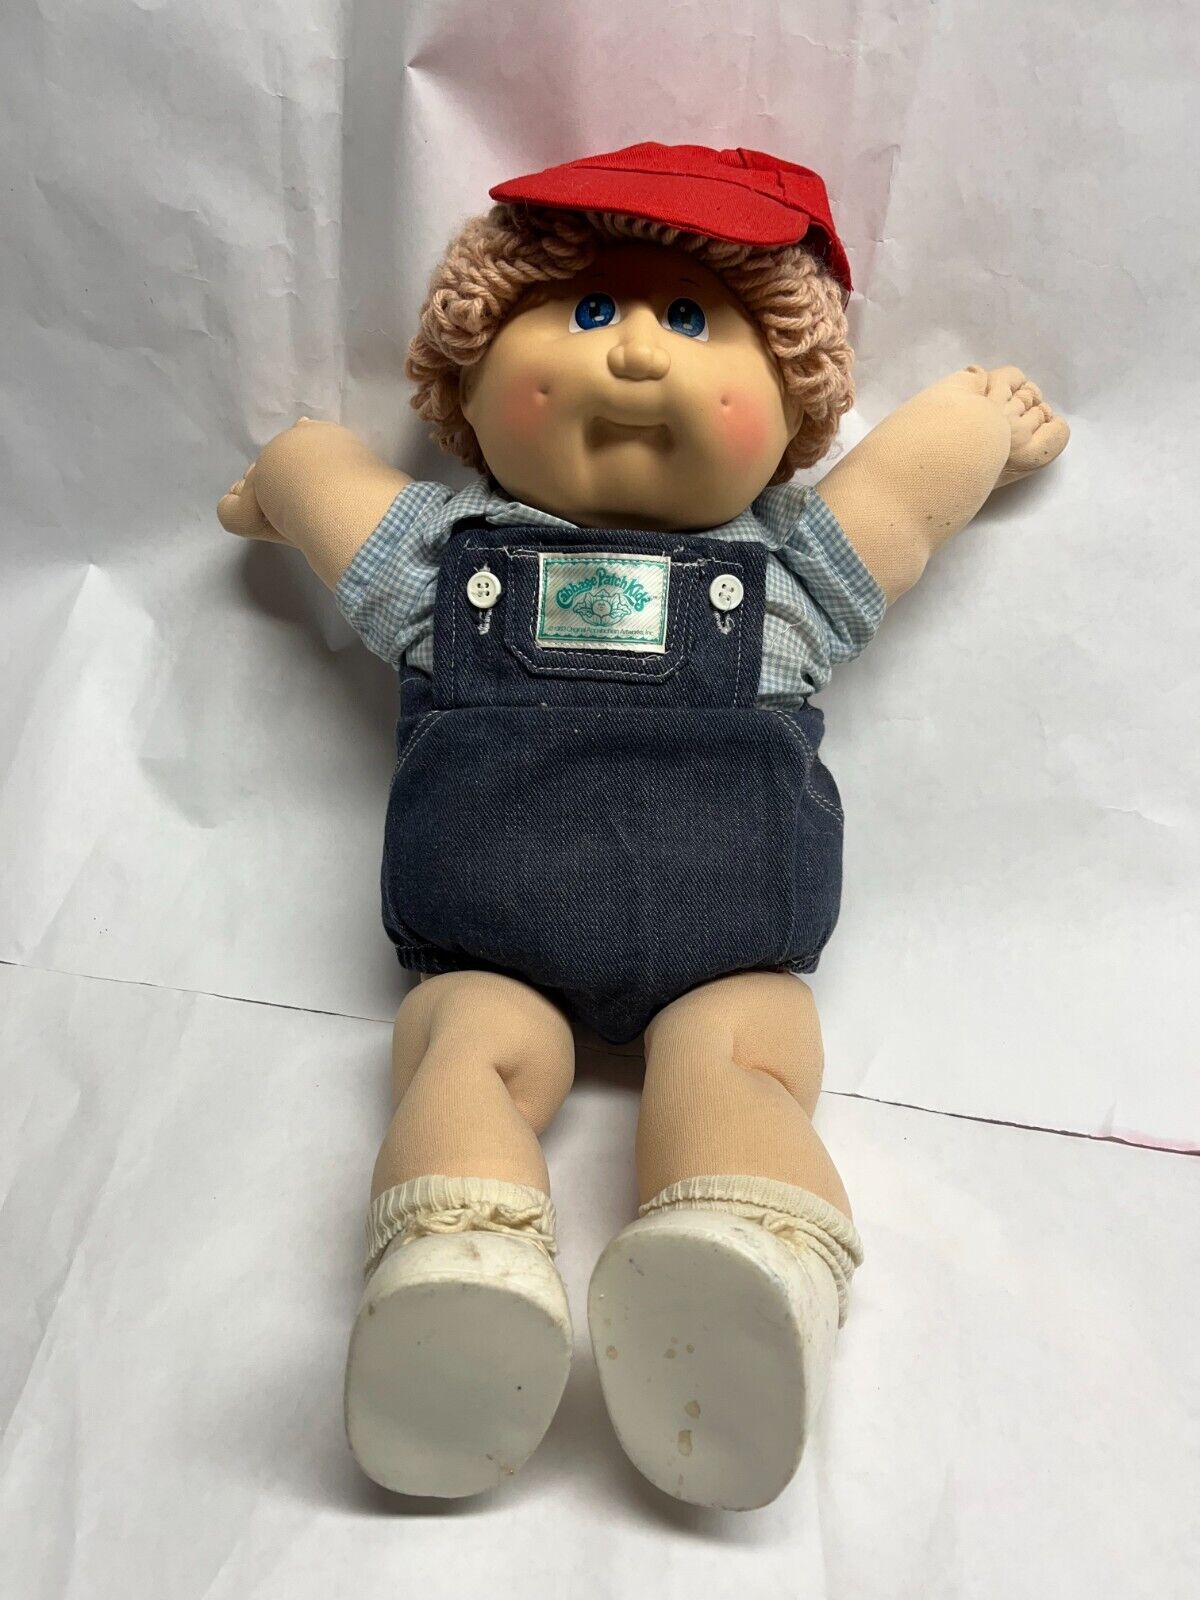 Vintage 1982 Cabbage Patch Kids Boy Doll Overalls Red Hat